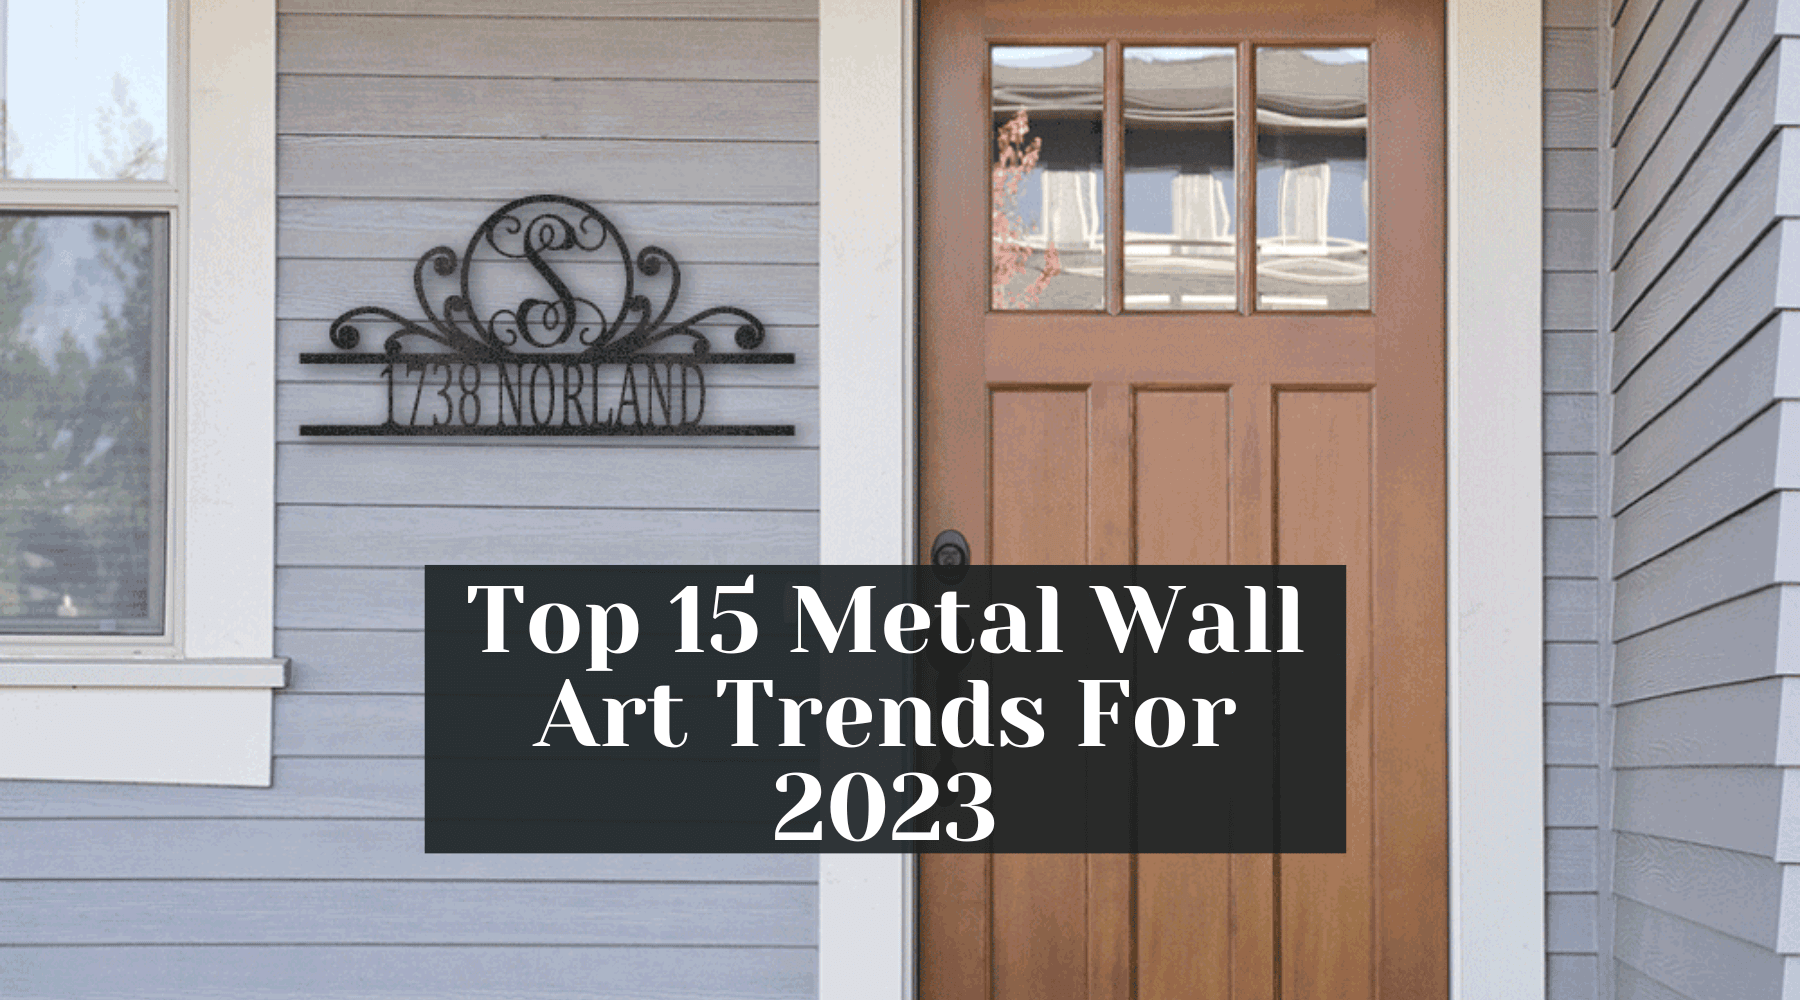 New Wall Art Trends To Watch Out For in 2023